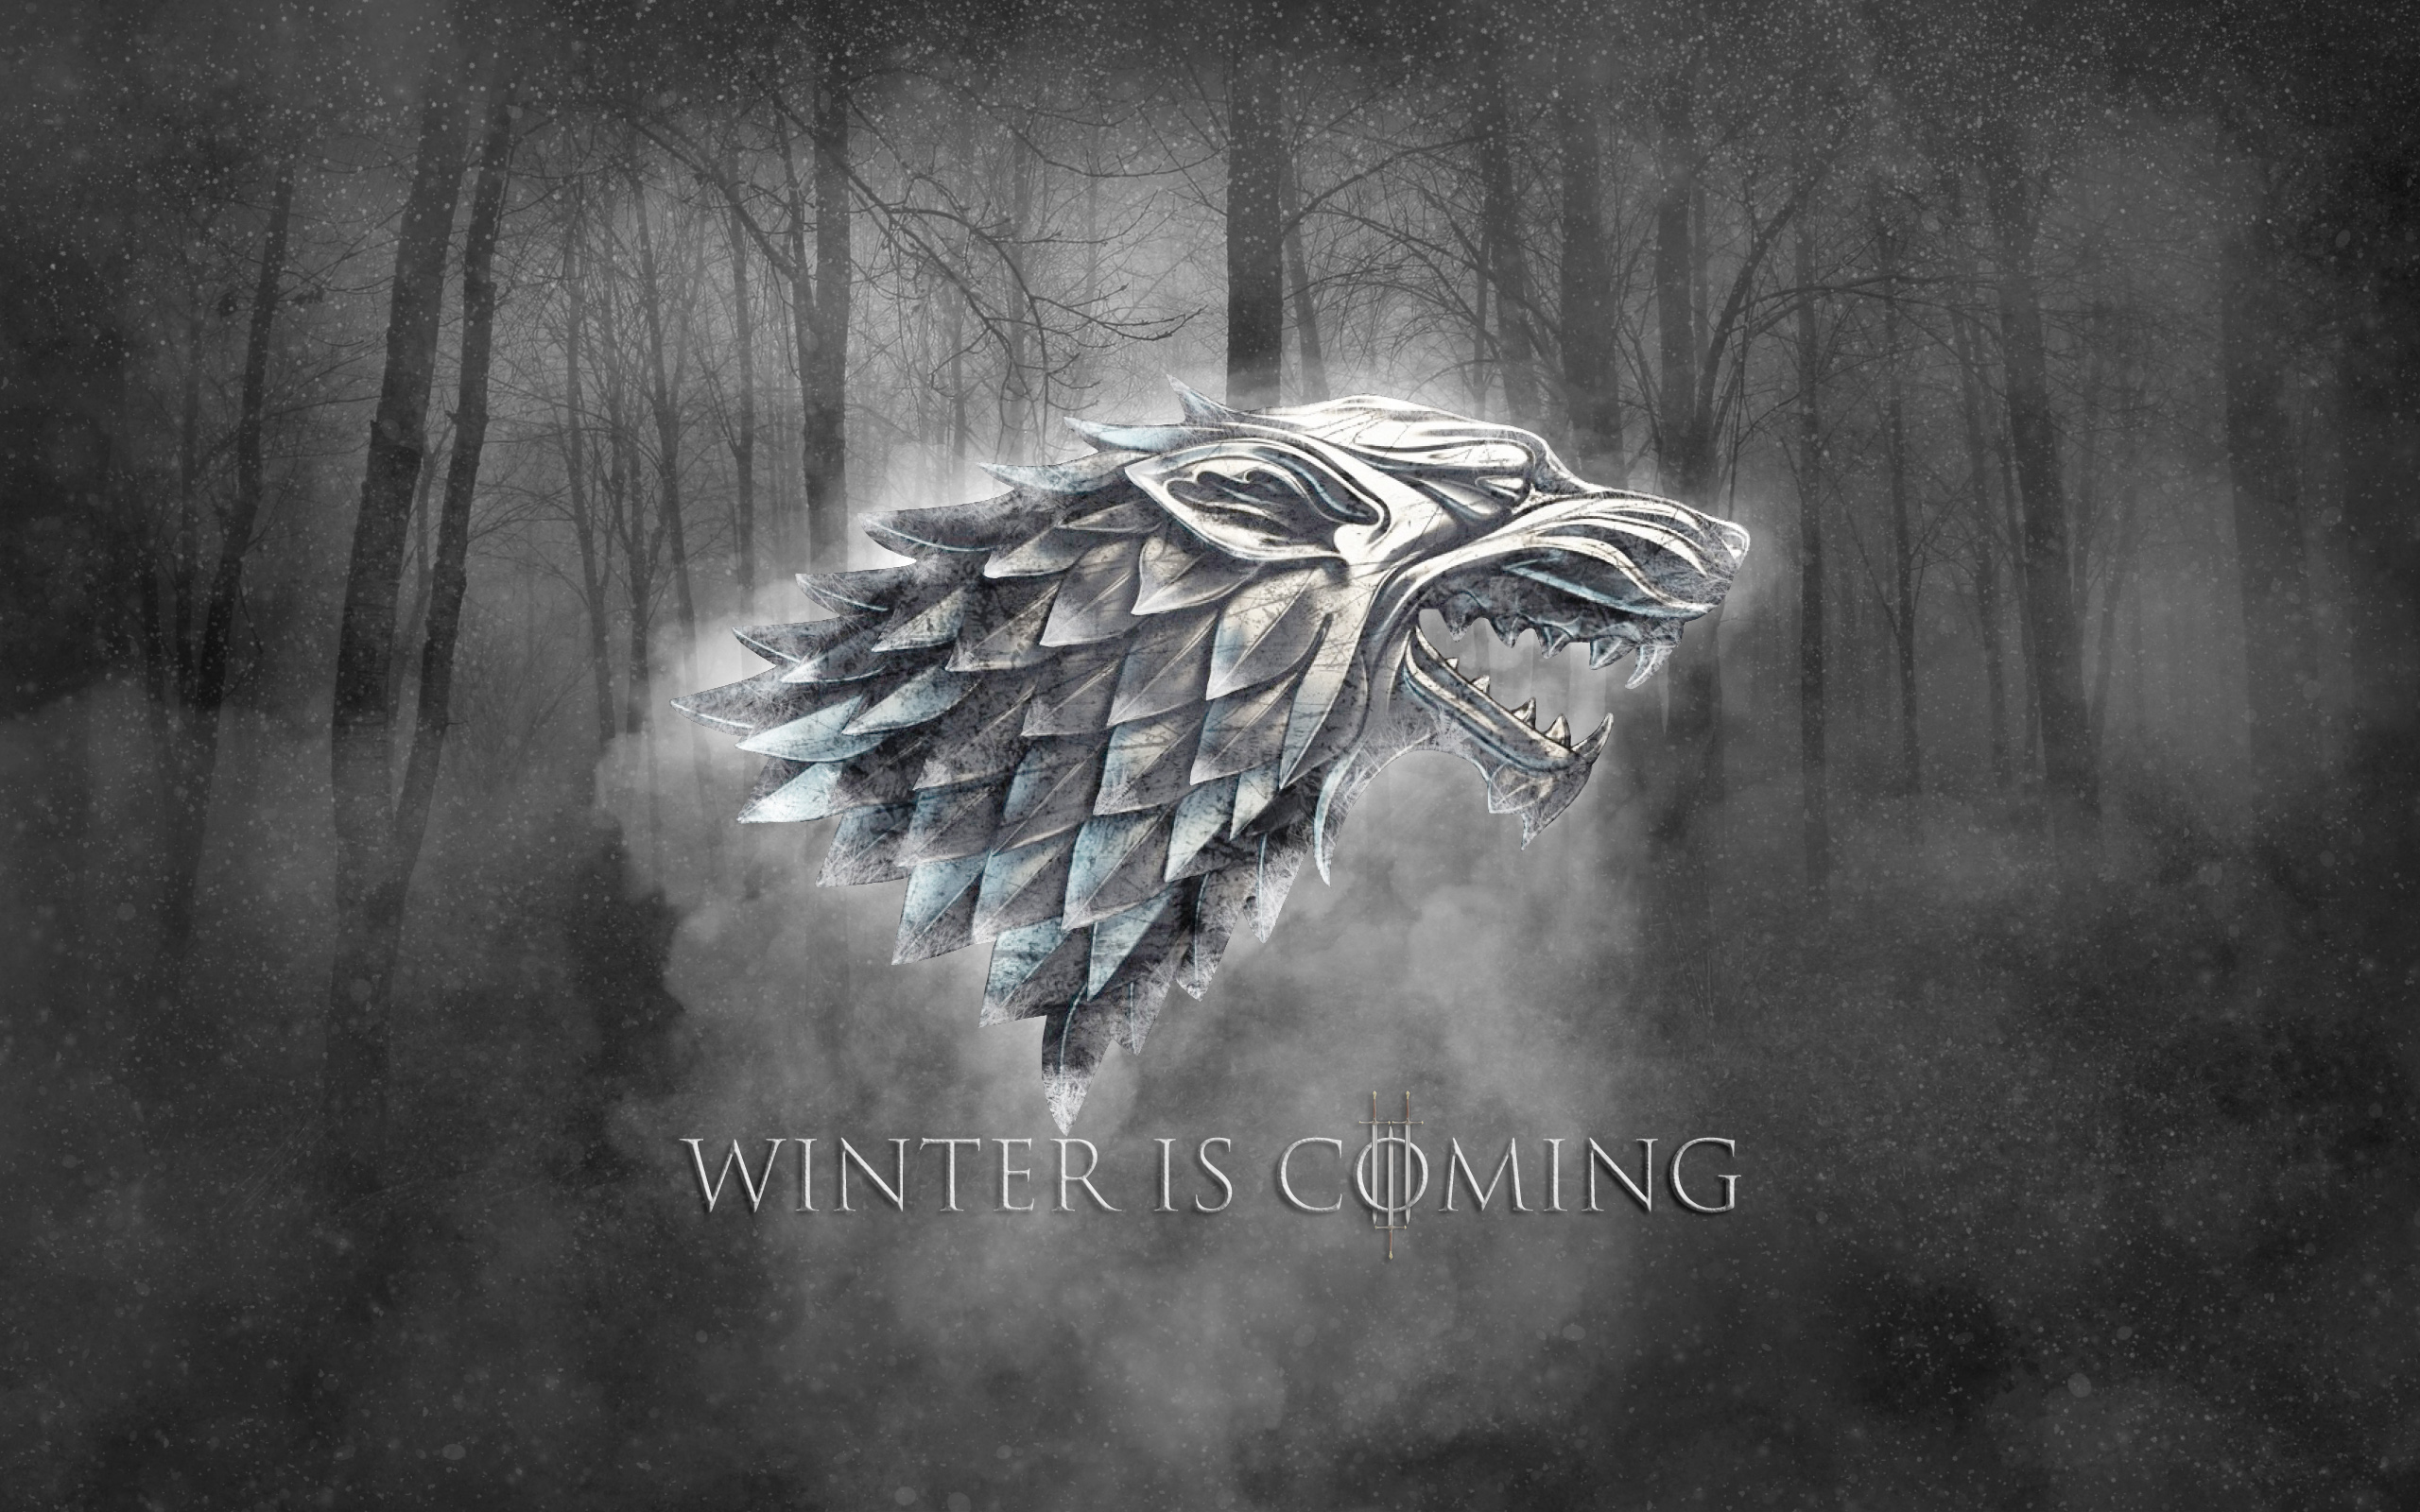 winter_is_coming_stark_by_bbboz-d68p15j.